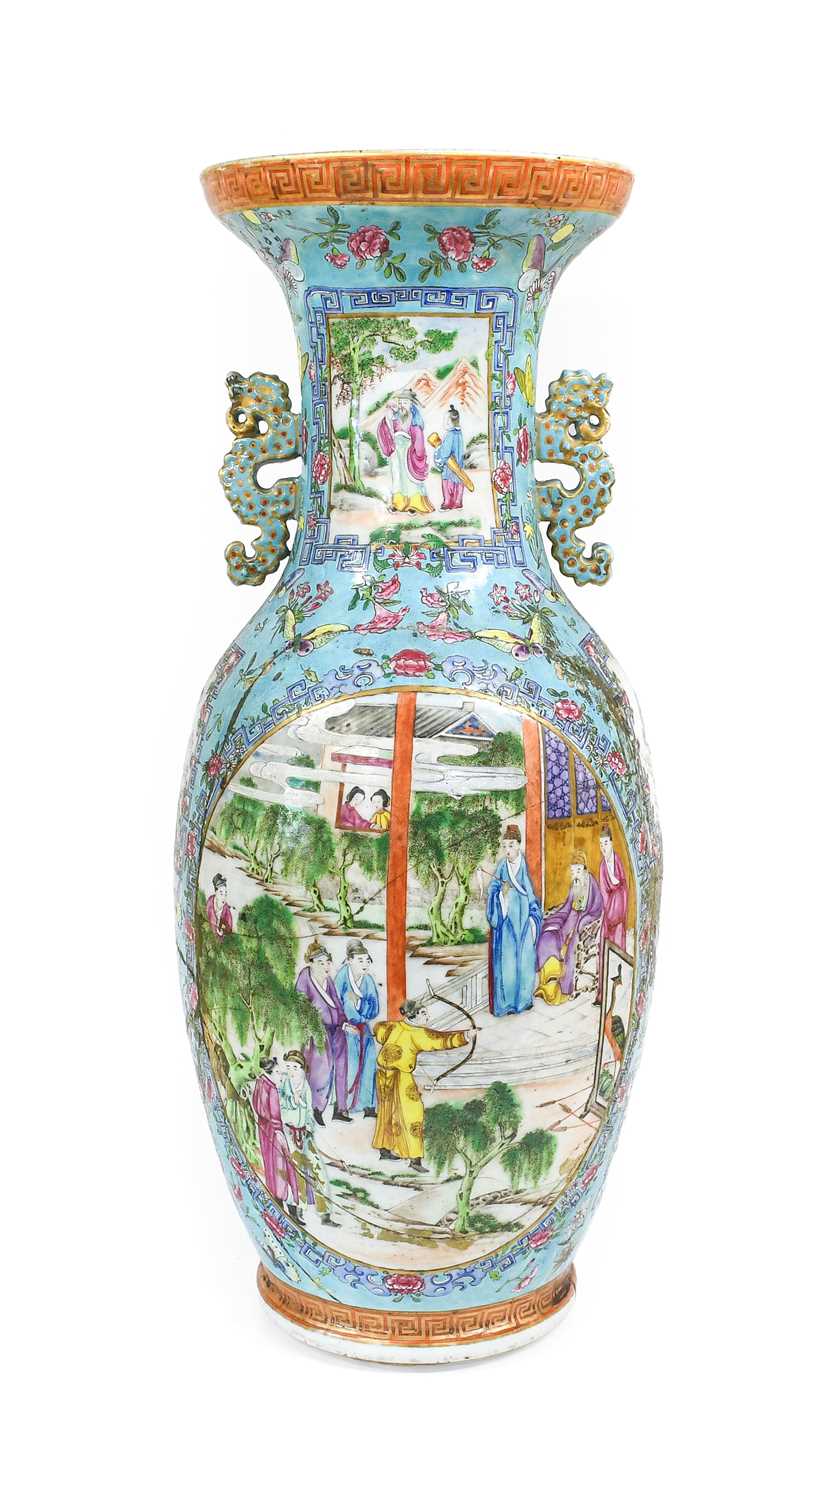 A Chinese Porcelain Vase, early 19th century, of baluster form, the flared neck with mythical